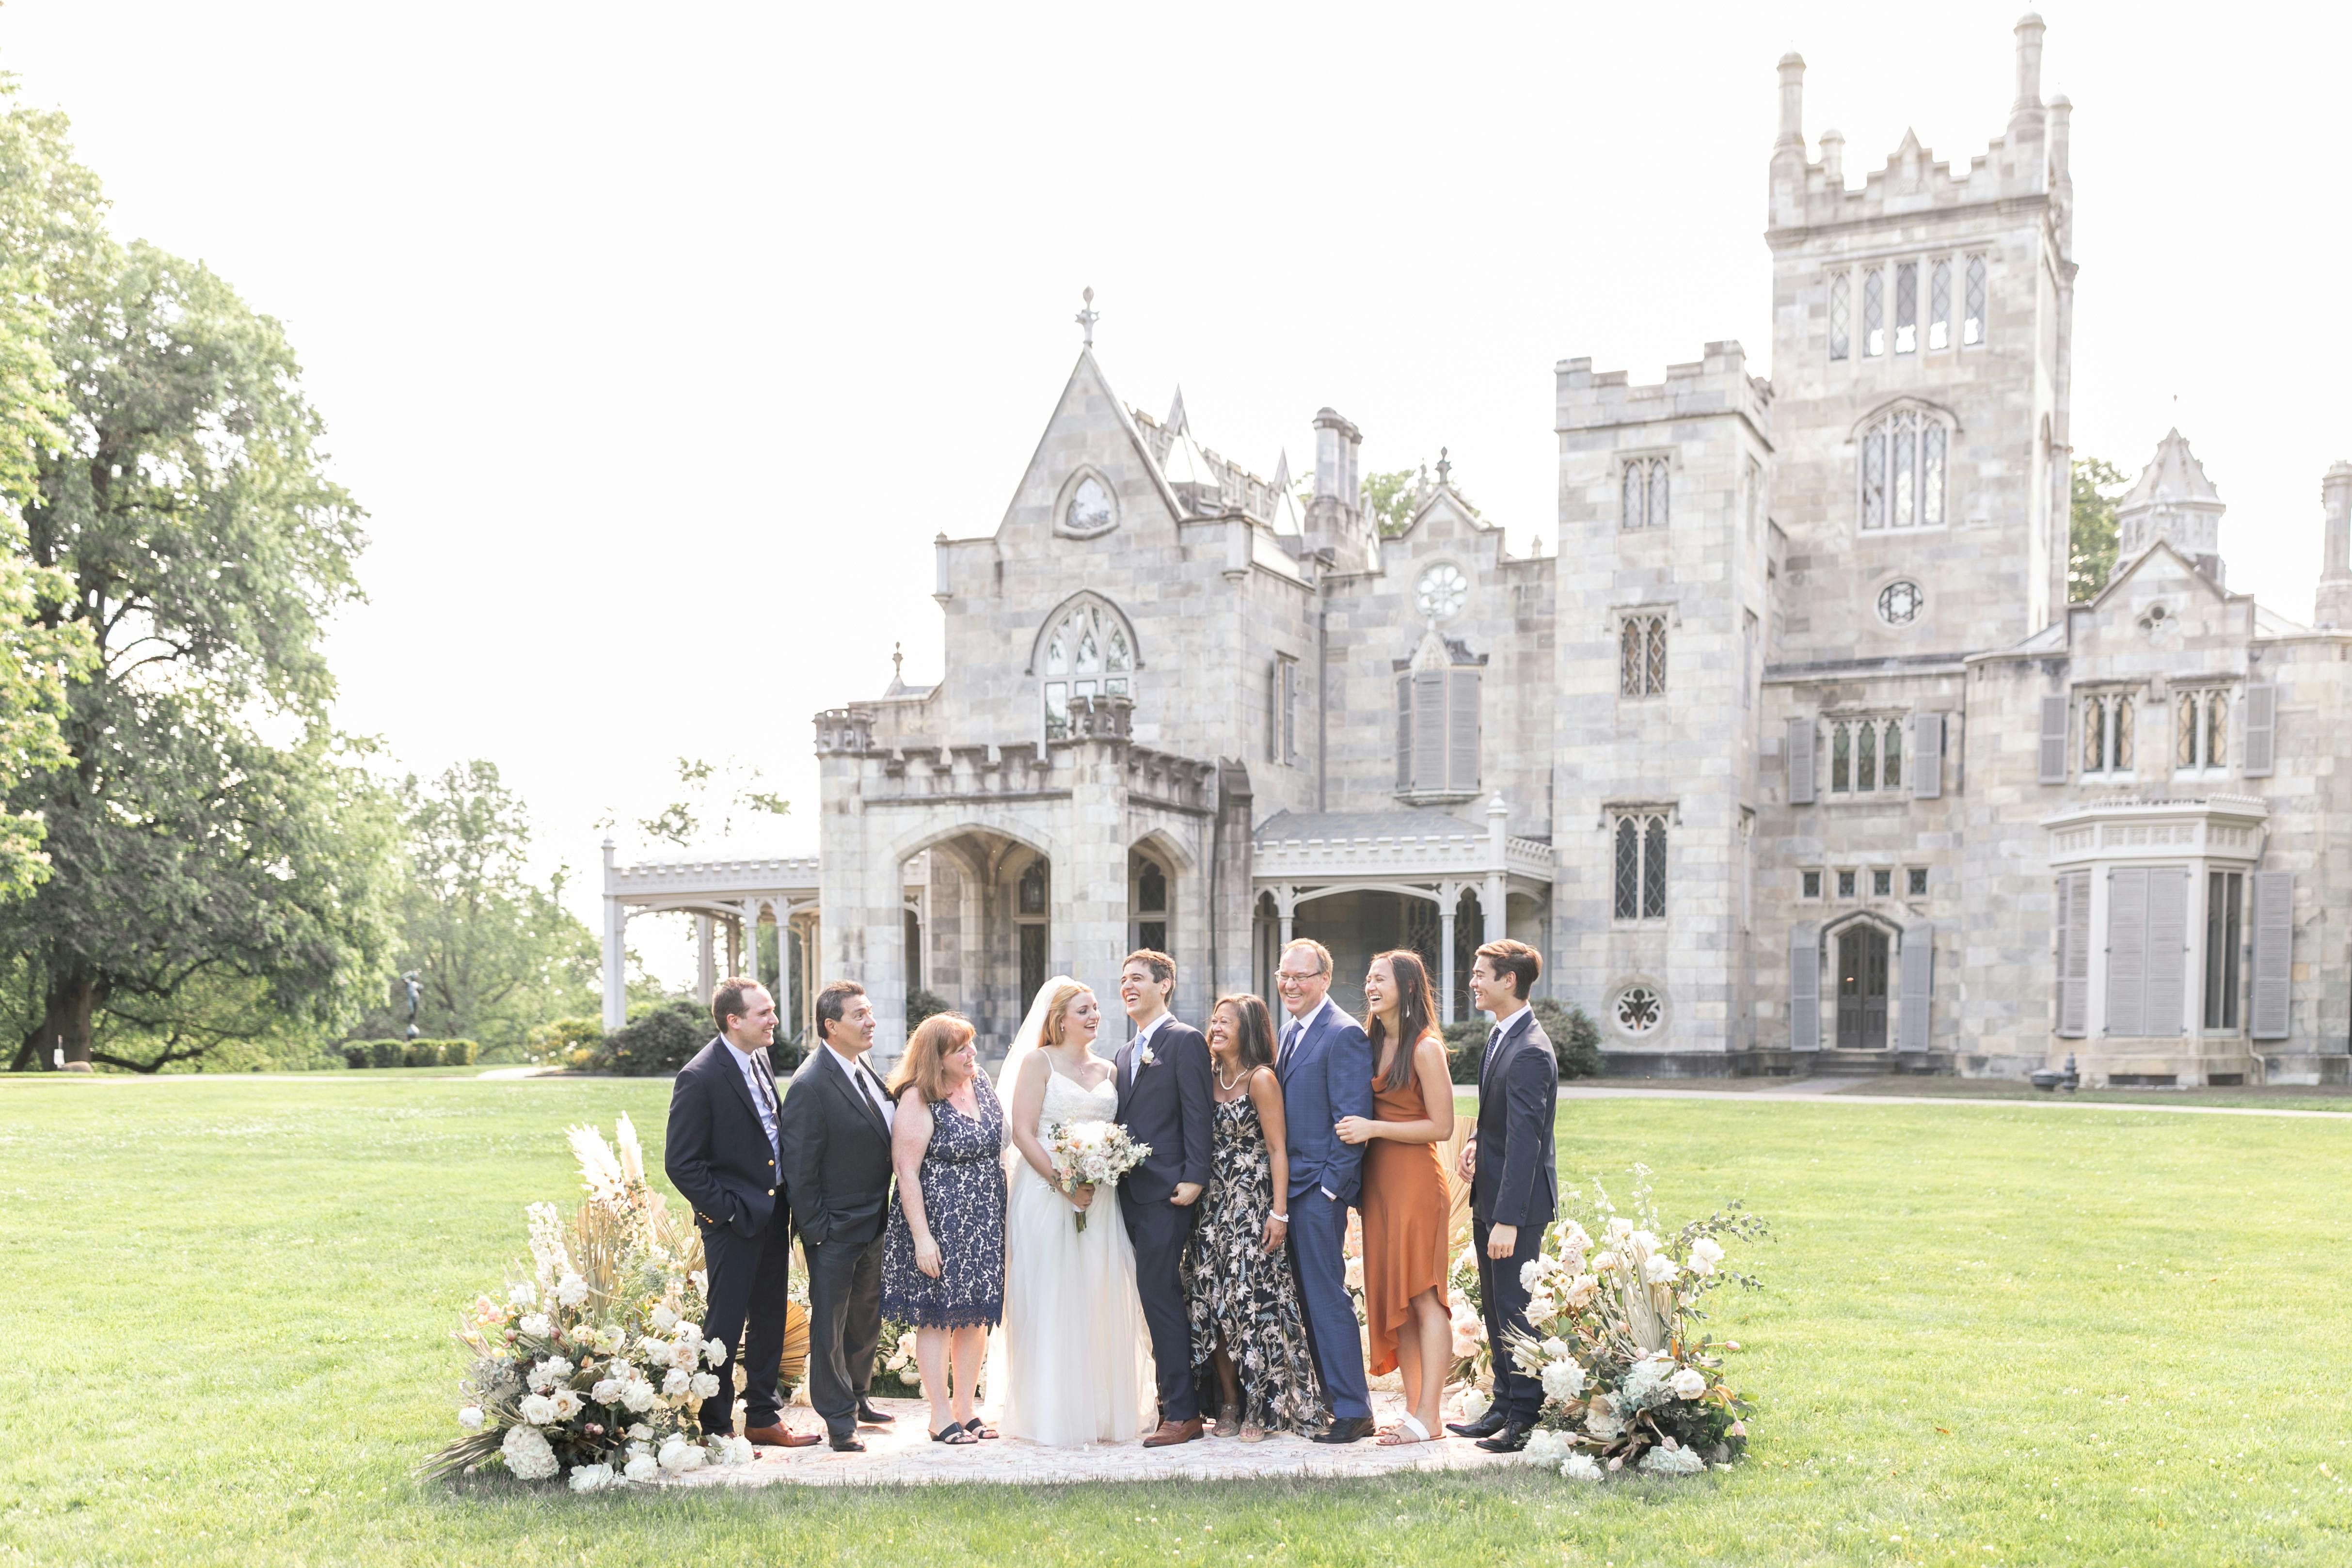 Elegant and Intimate Wedding at Lyndhurst Mansion in Tarrytown, New York | PartySlate